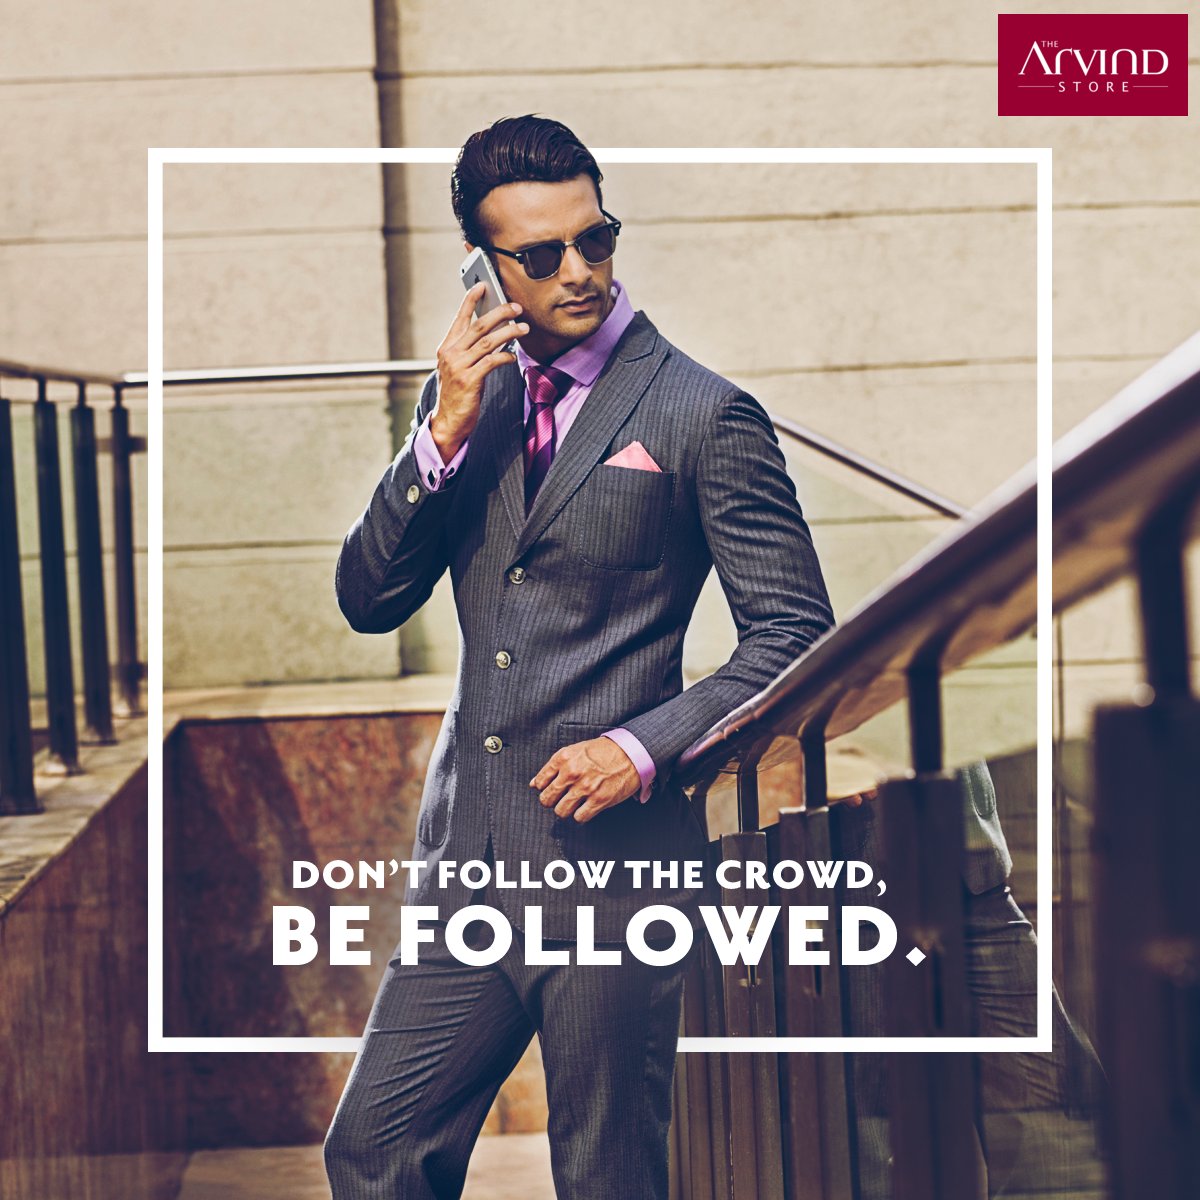 This summer go classic with pinstripes and 3 buttoned suits. #ArvindStyleTips https://t.co/1MY5VEZo7s